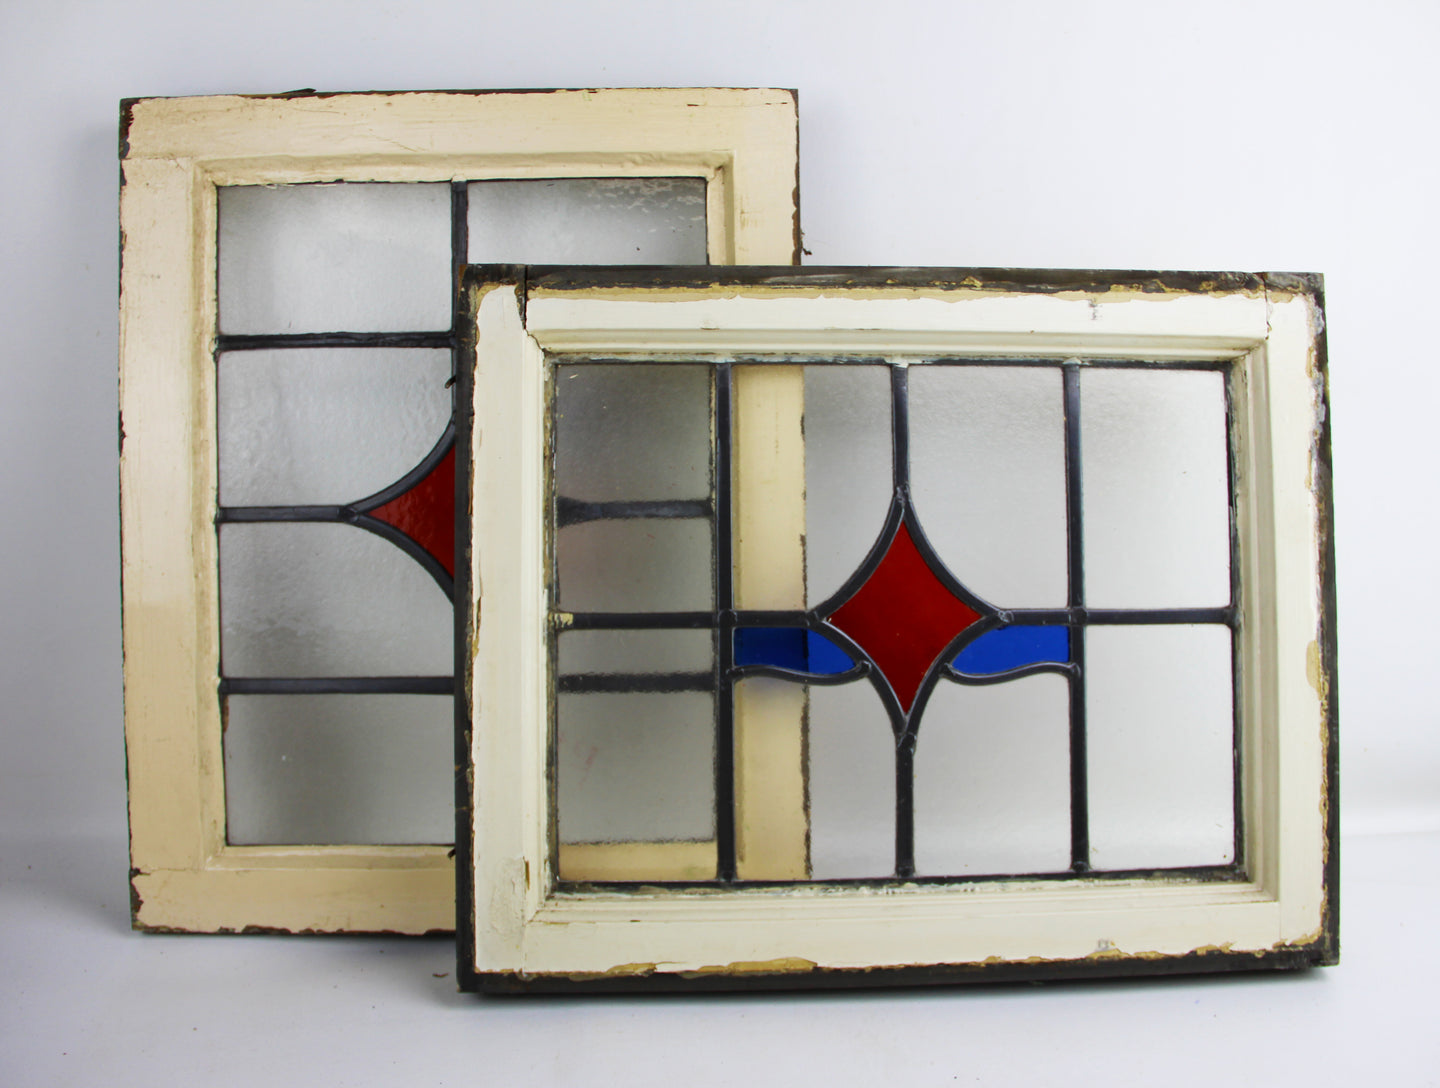 Stained Glass Window from England, English Repurposed Stained Glass window